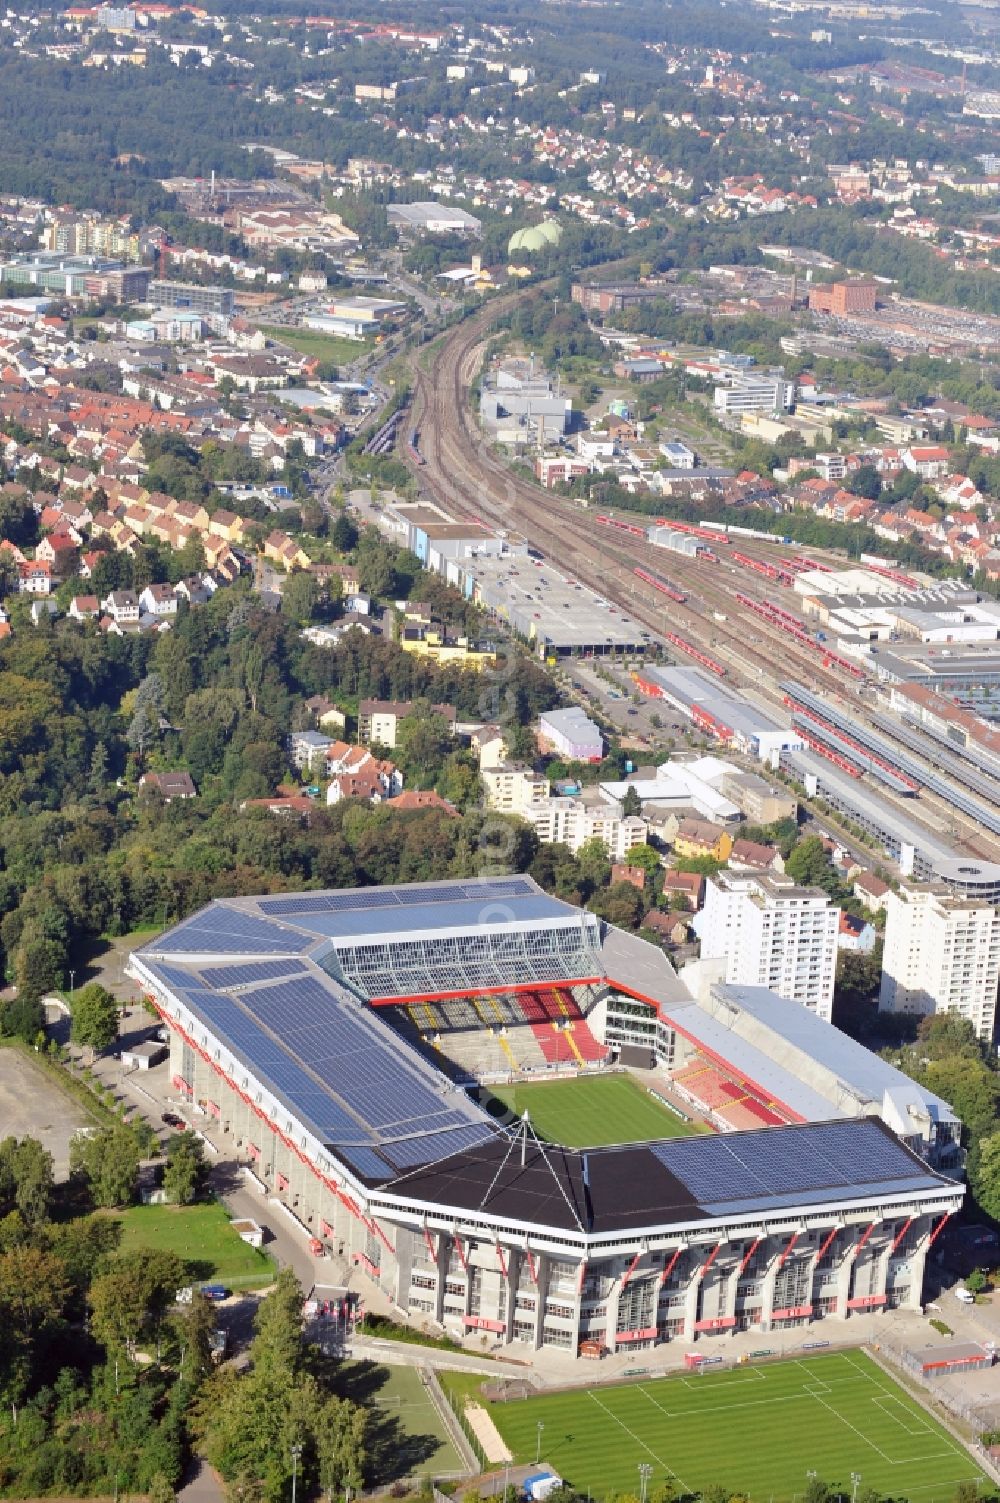 Kaiserslautern from above - Sports facility grounds of the Arena stadium Fritz-Walter-Stadion in destrict Betzenberg on Fritz-Walter-Strasse in Kaiserslautern in the state Rhineland-Palatinate, Germany